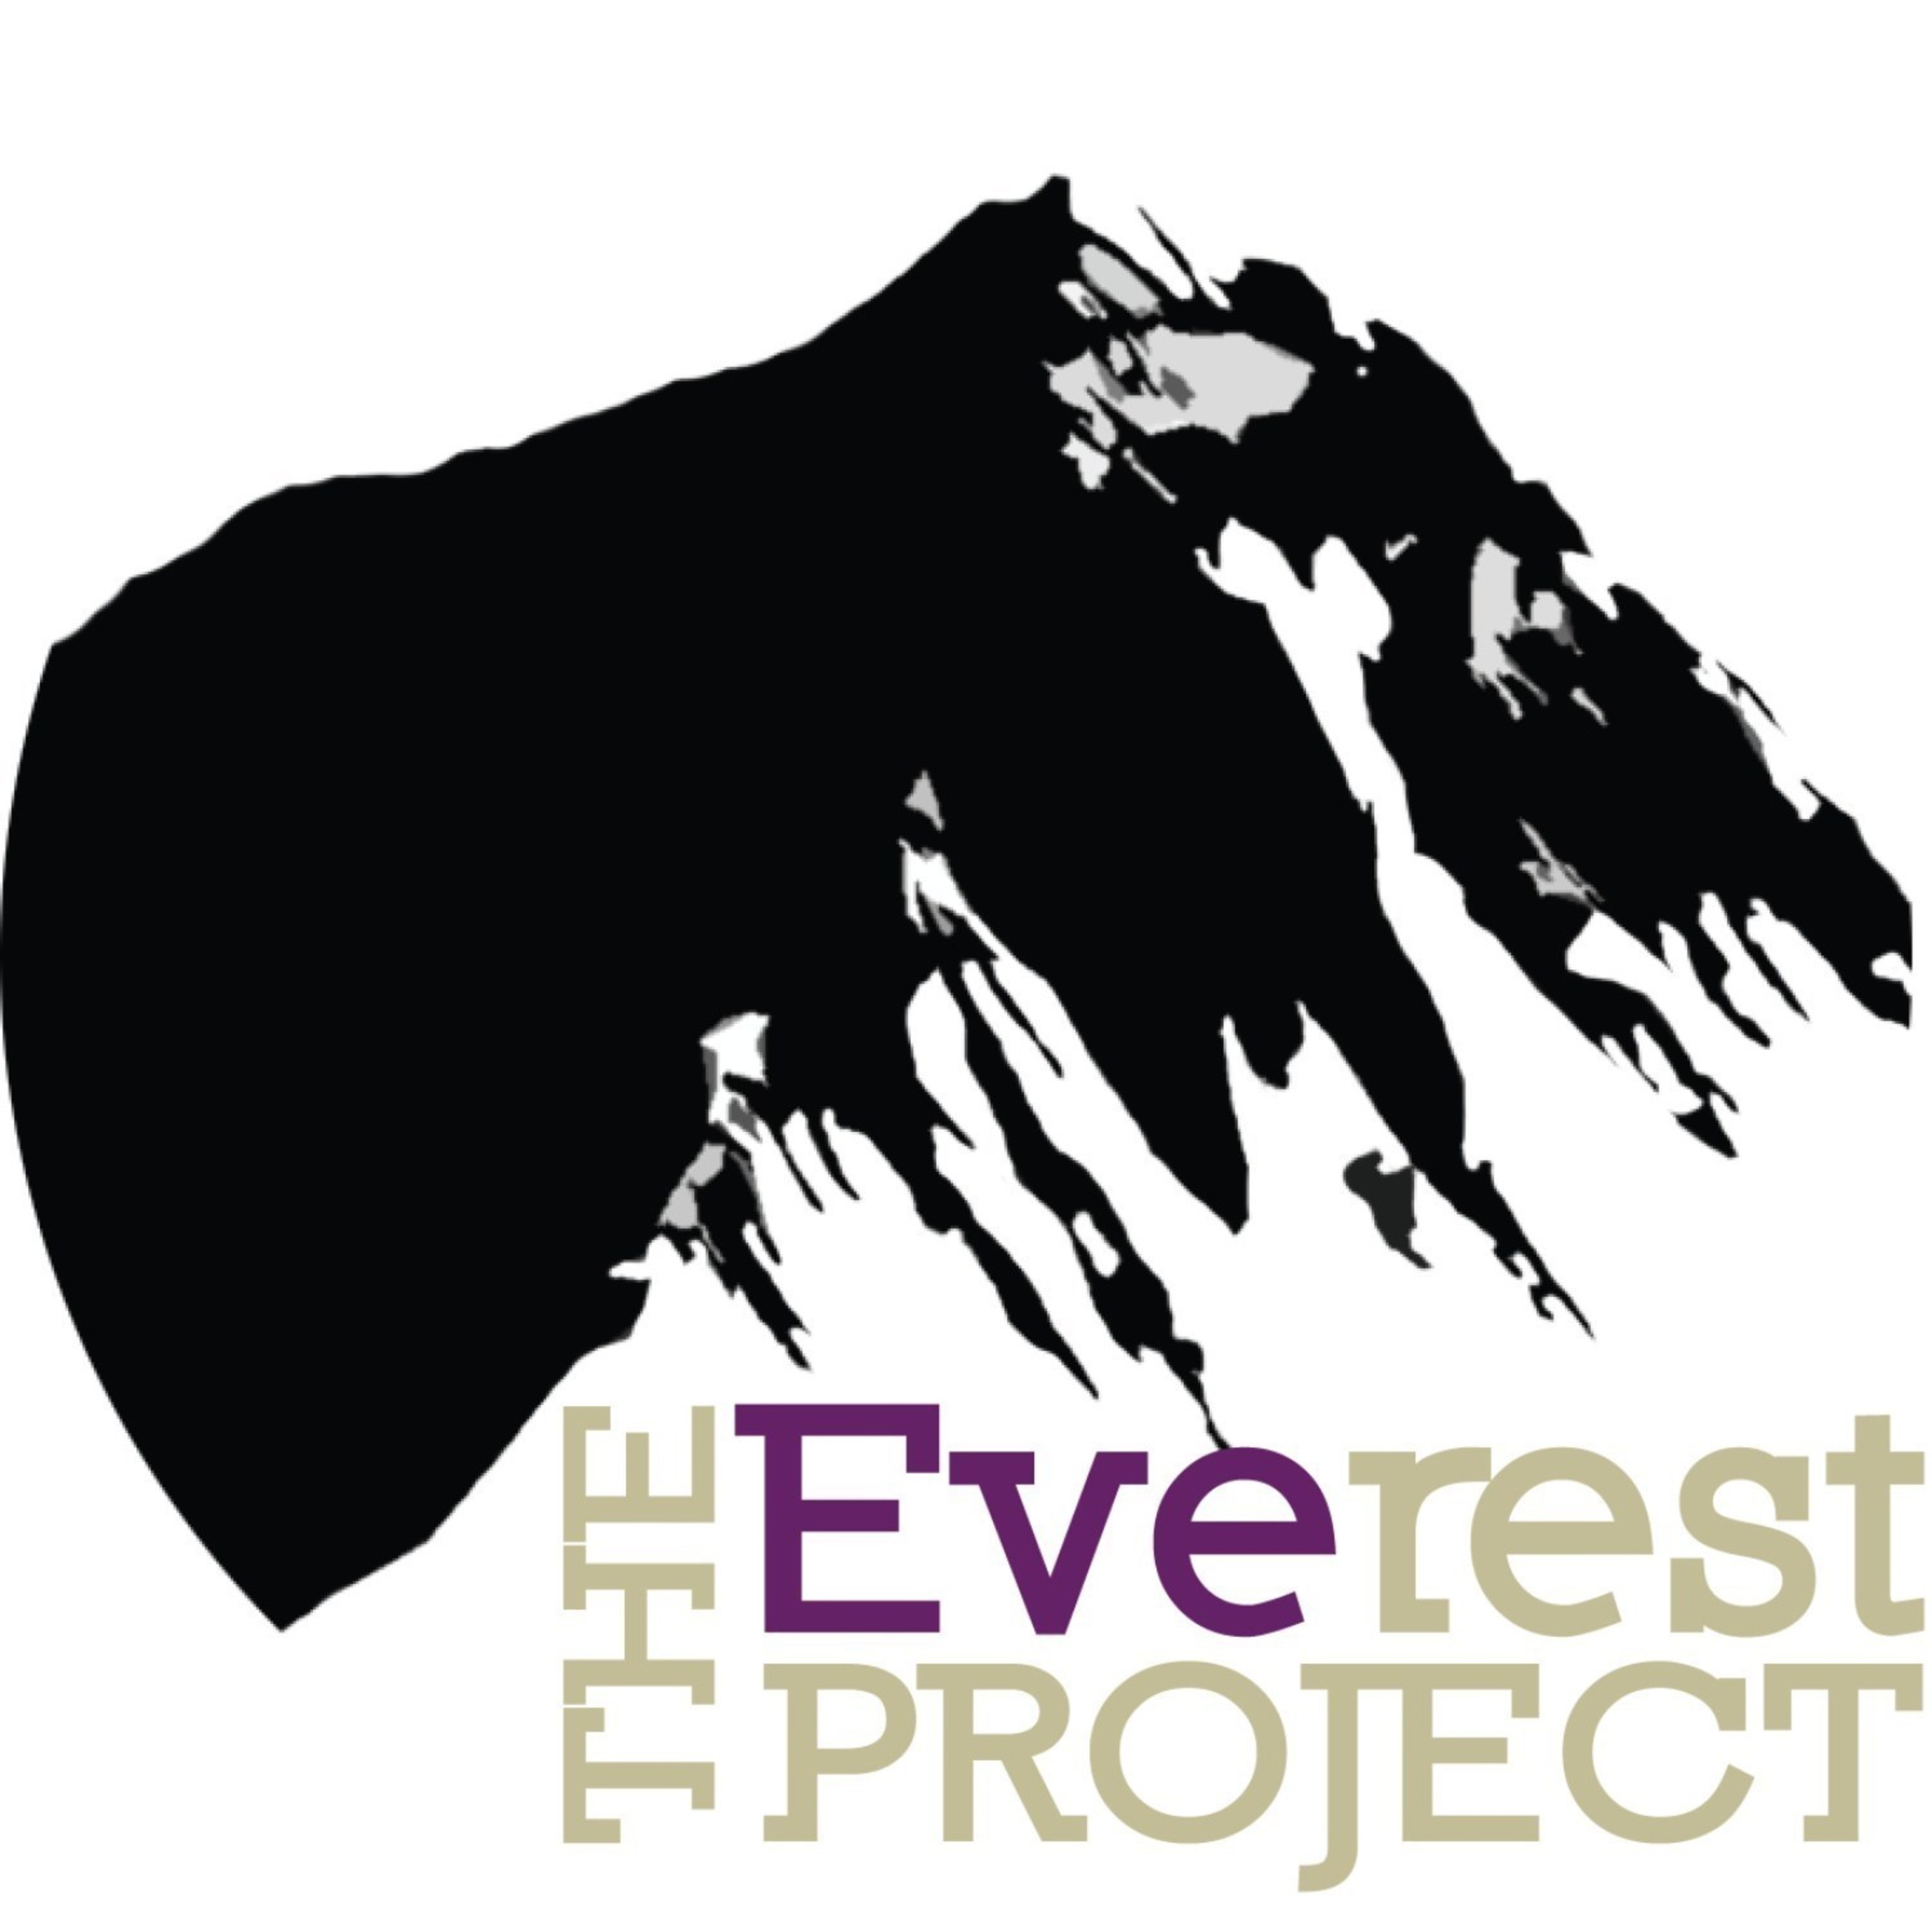 The Everest Project is the first theoretical and practical research initiative to take a multicultural and gender specific perspective in examining the role of women executives in corporate America.